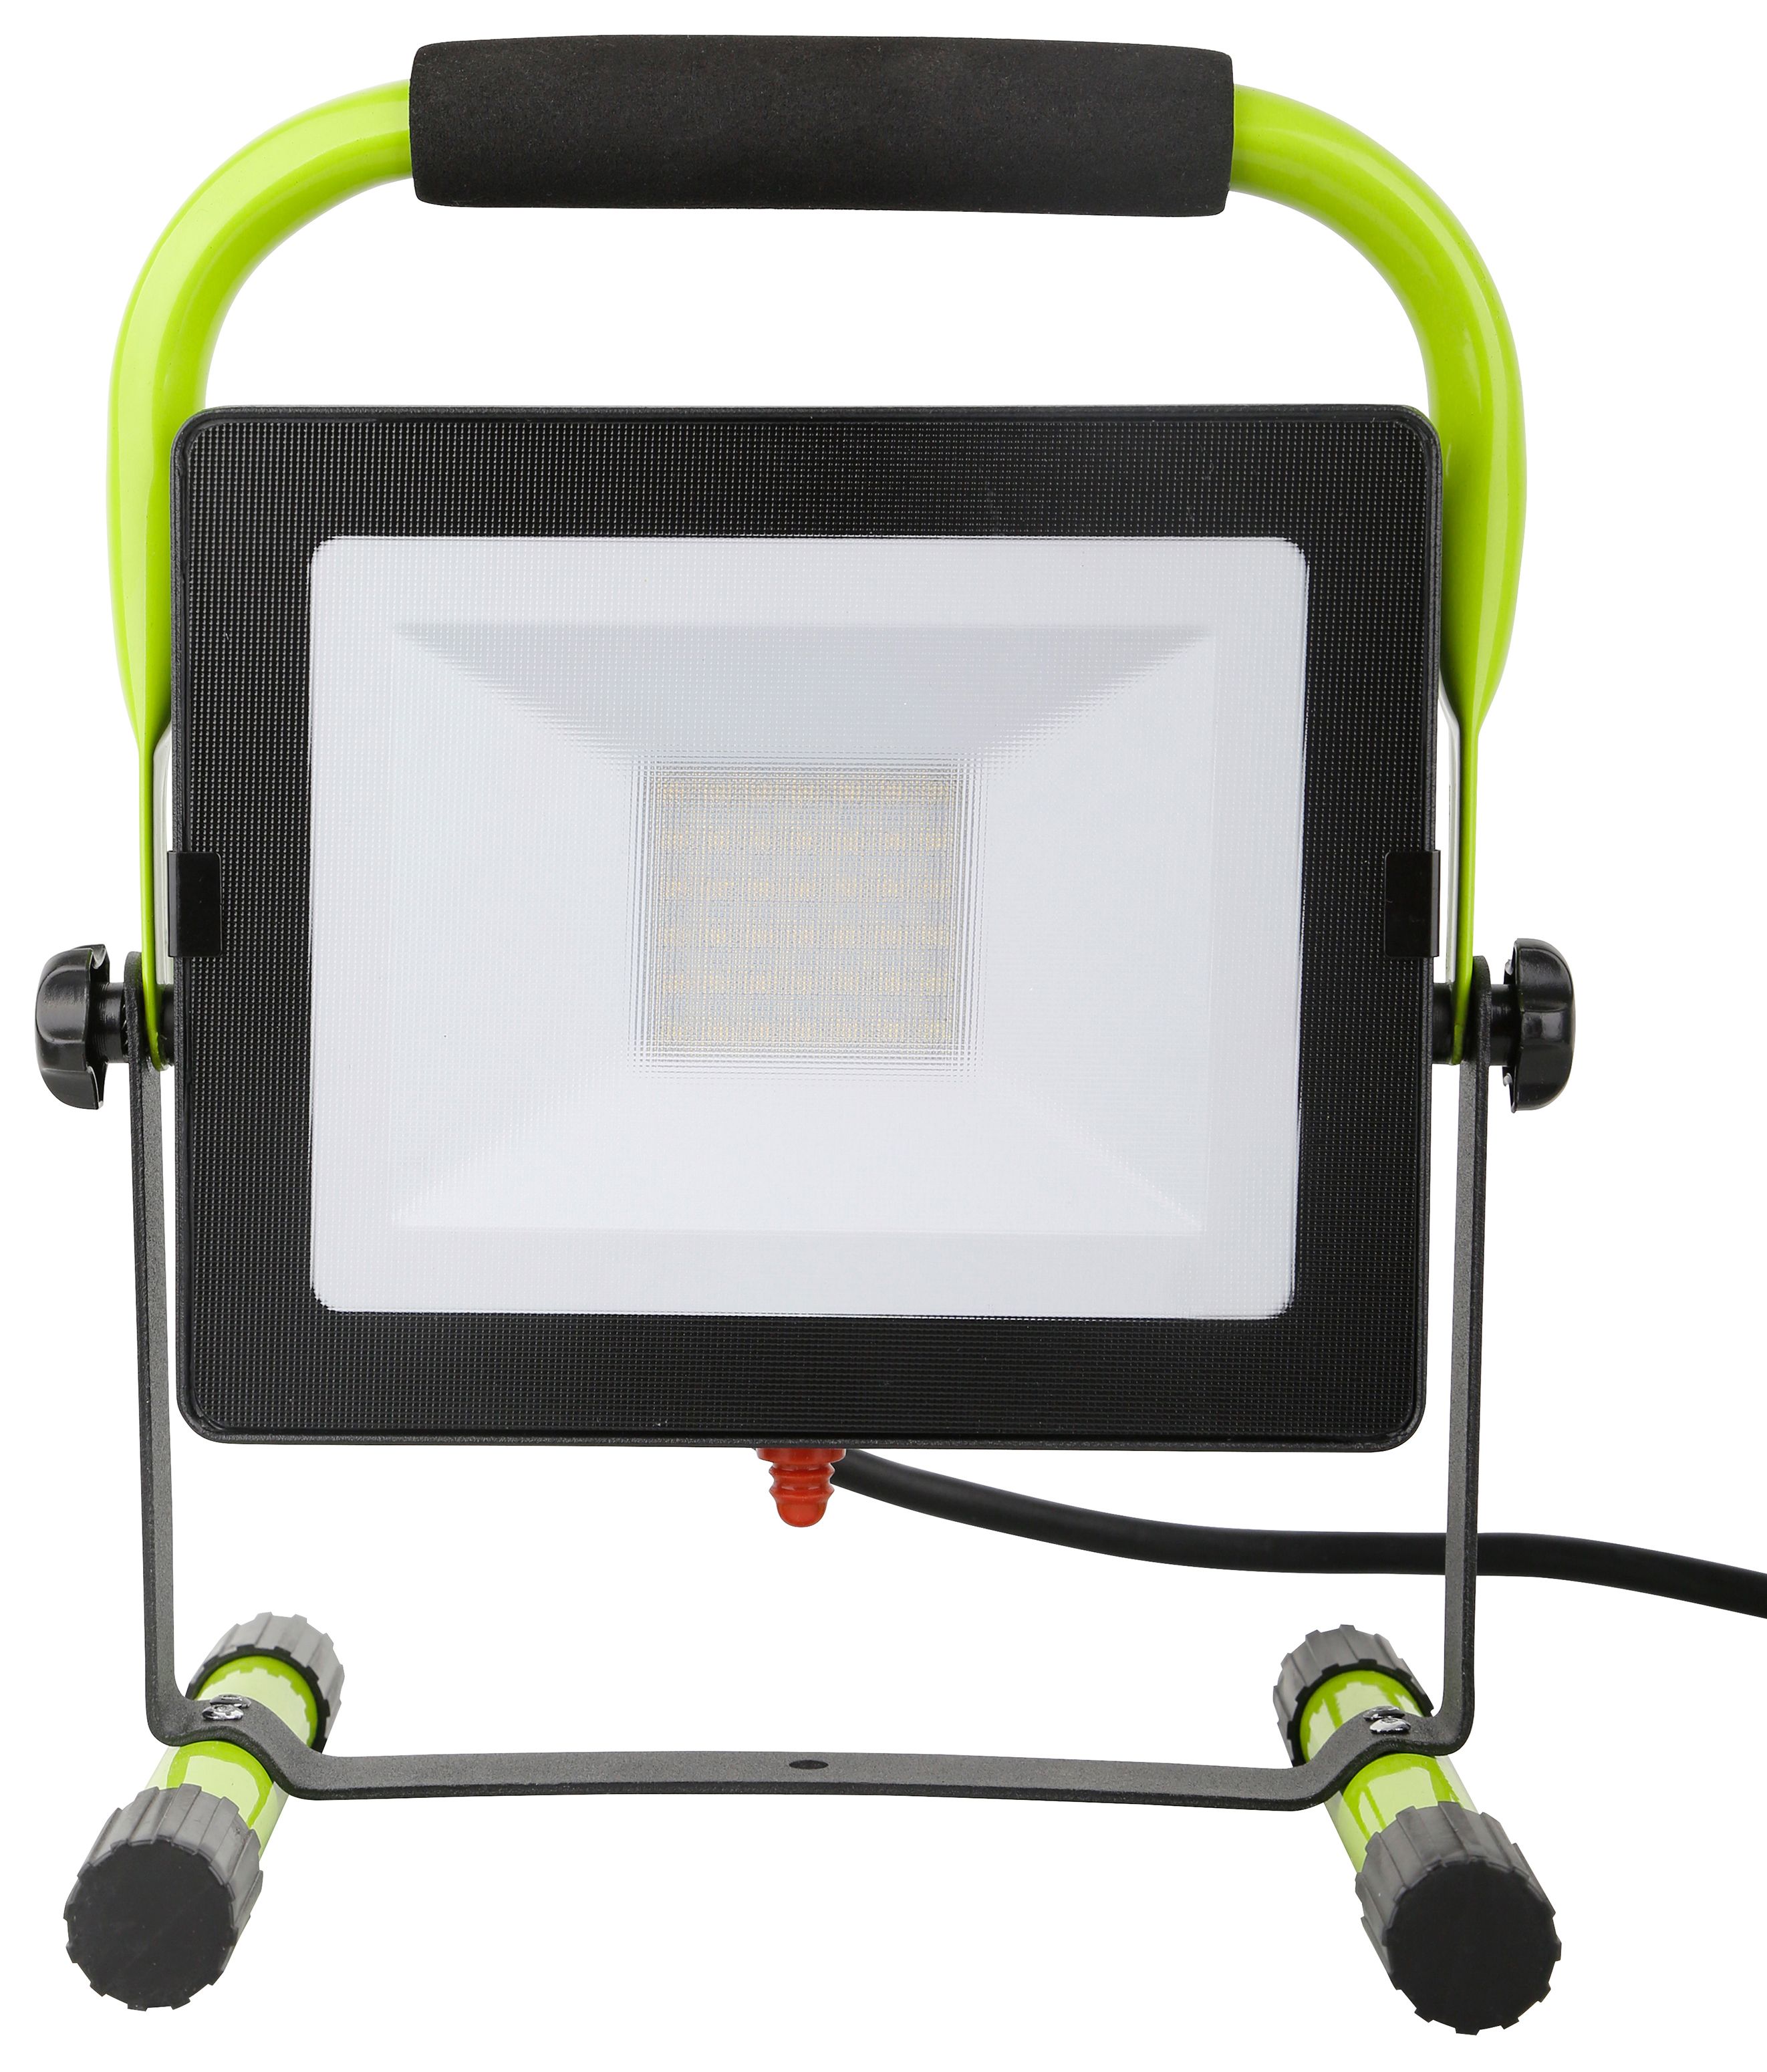 Image of Luceco Eco 2500LM 5000K Portable Work Light - 30W